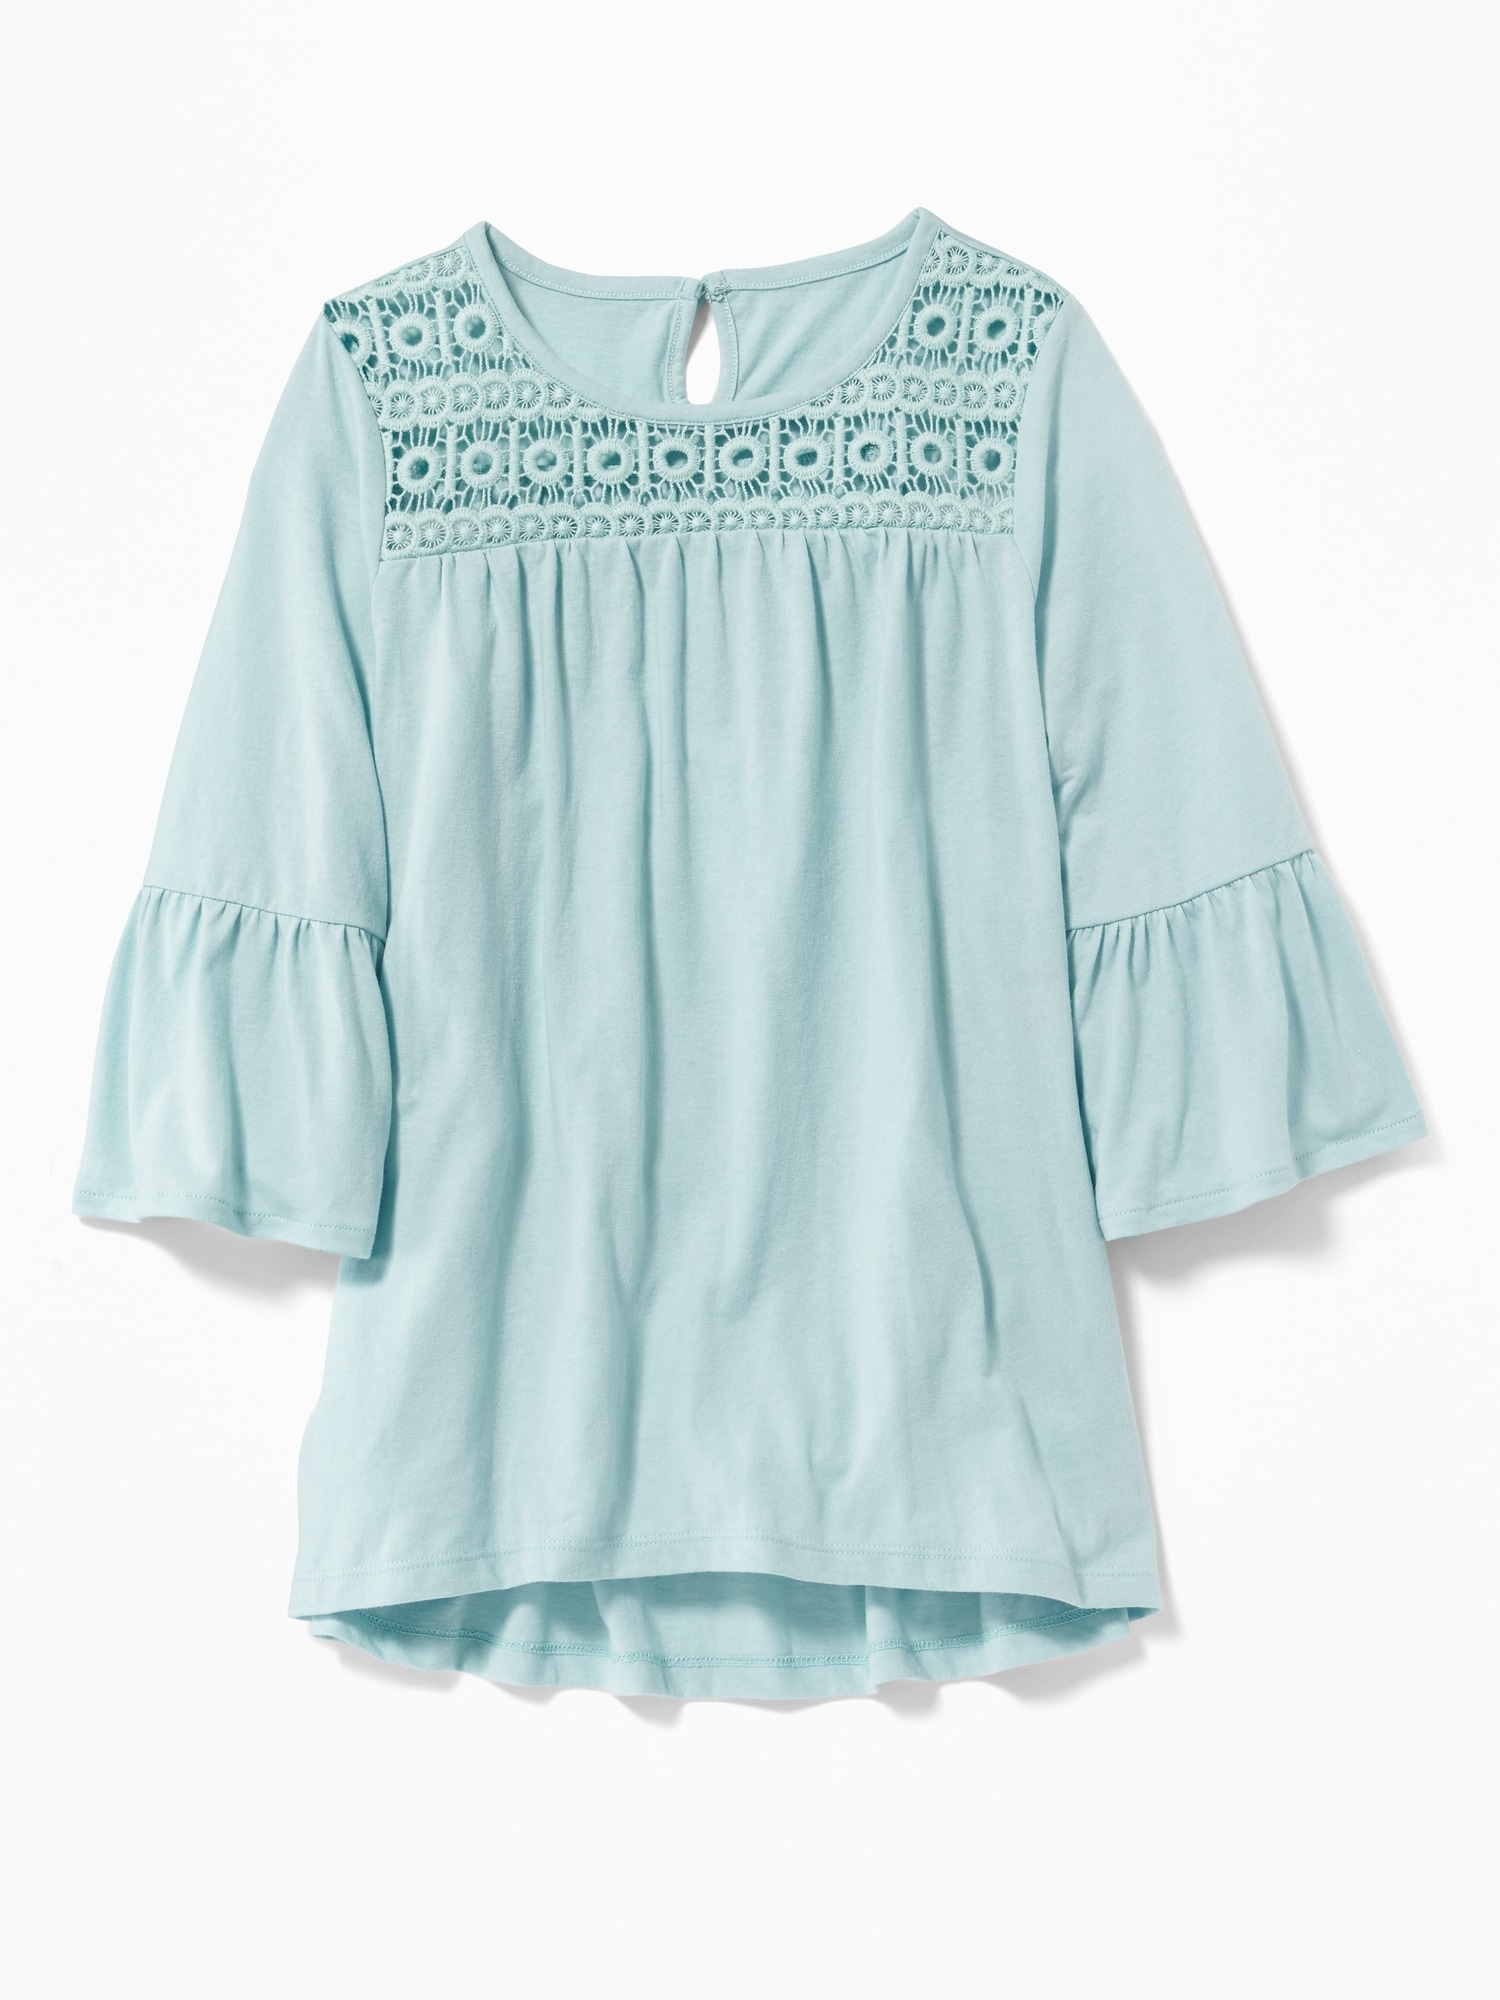 Lace-Yoke A-Line Top for Girls | Old Navy